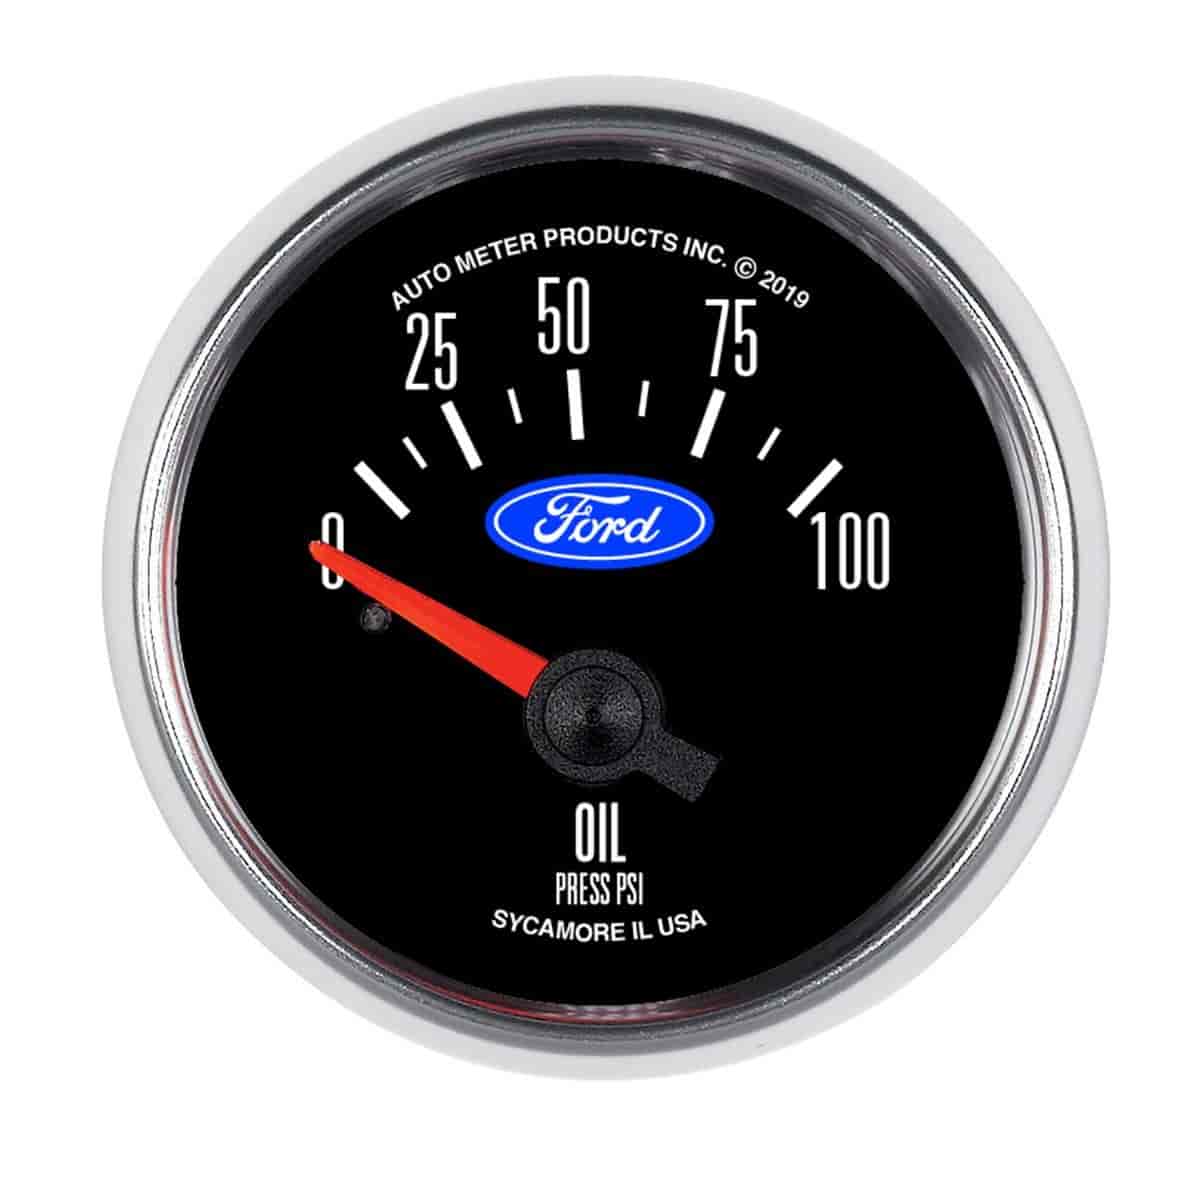 Officially-Licensed Ford Oil Pressure Gauge 2 1/16 in., 0-100 PSI, Electrical (Short Sweep)